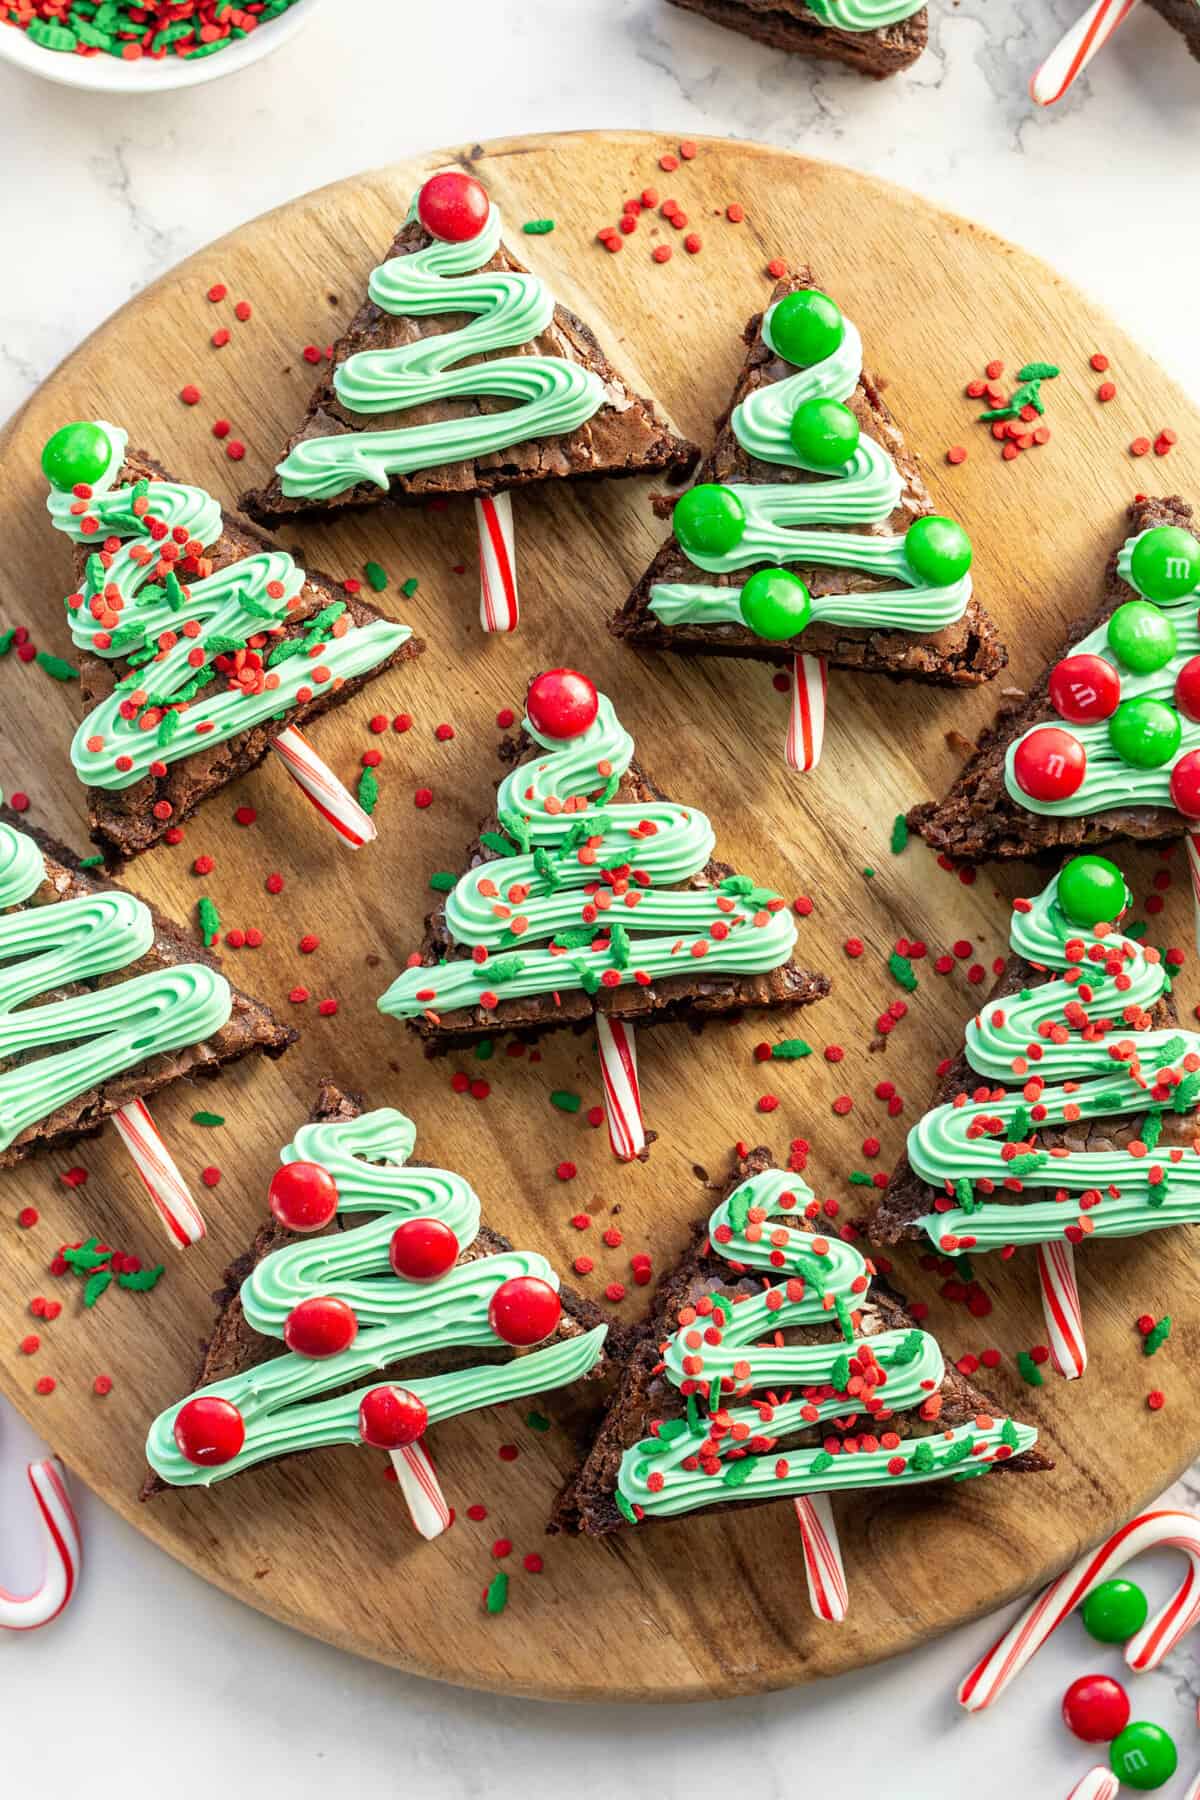 A top down image of Christmas tree brownies with garland green frosting and red and green sprinkles with M&Ms and candy cane sticks for decoration, served on a wooden round board.